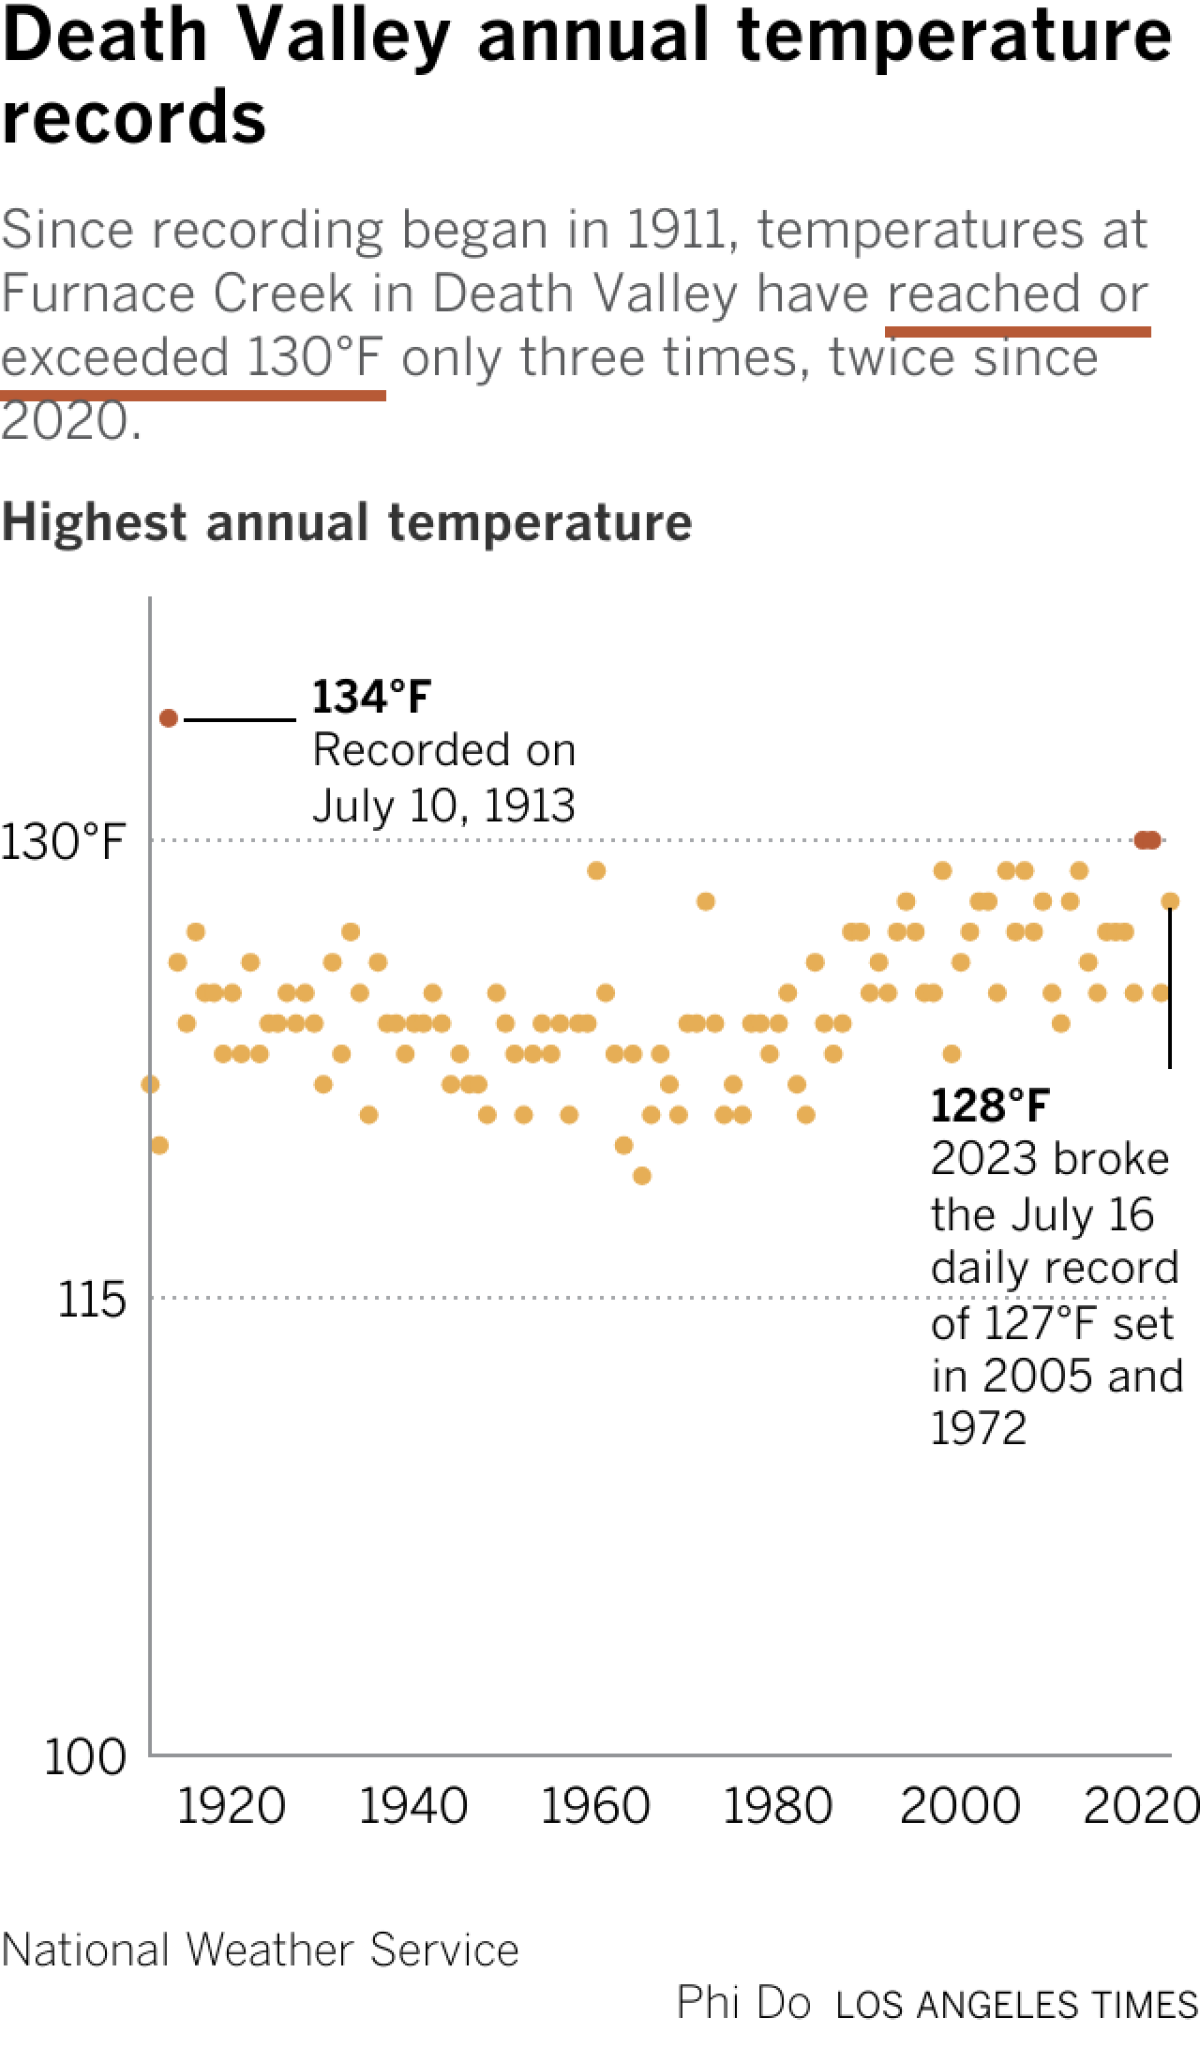 Scatter plot showing temperatures in Death Valley have exceeded 130°F only three times in 1913, 2020 and 2021.